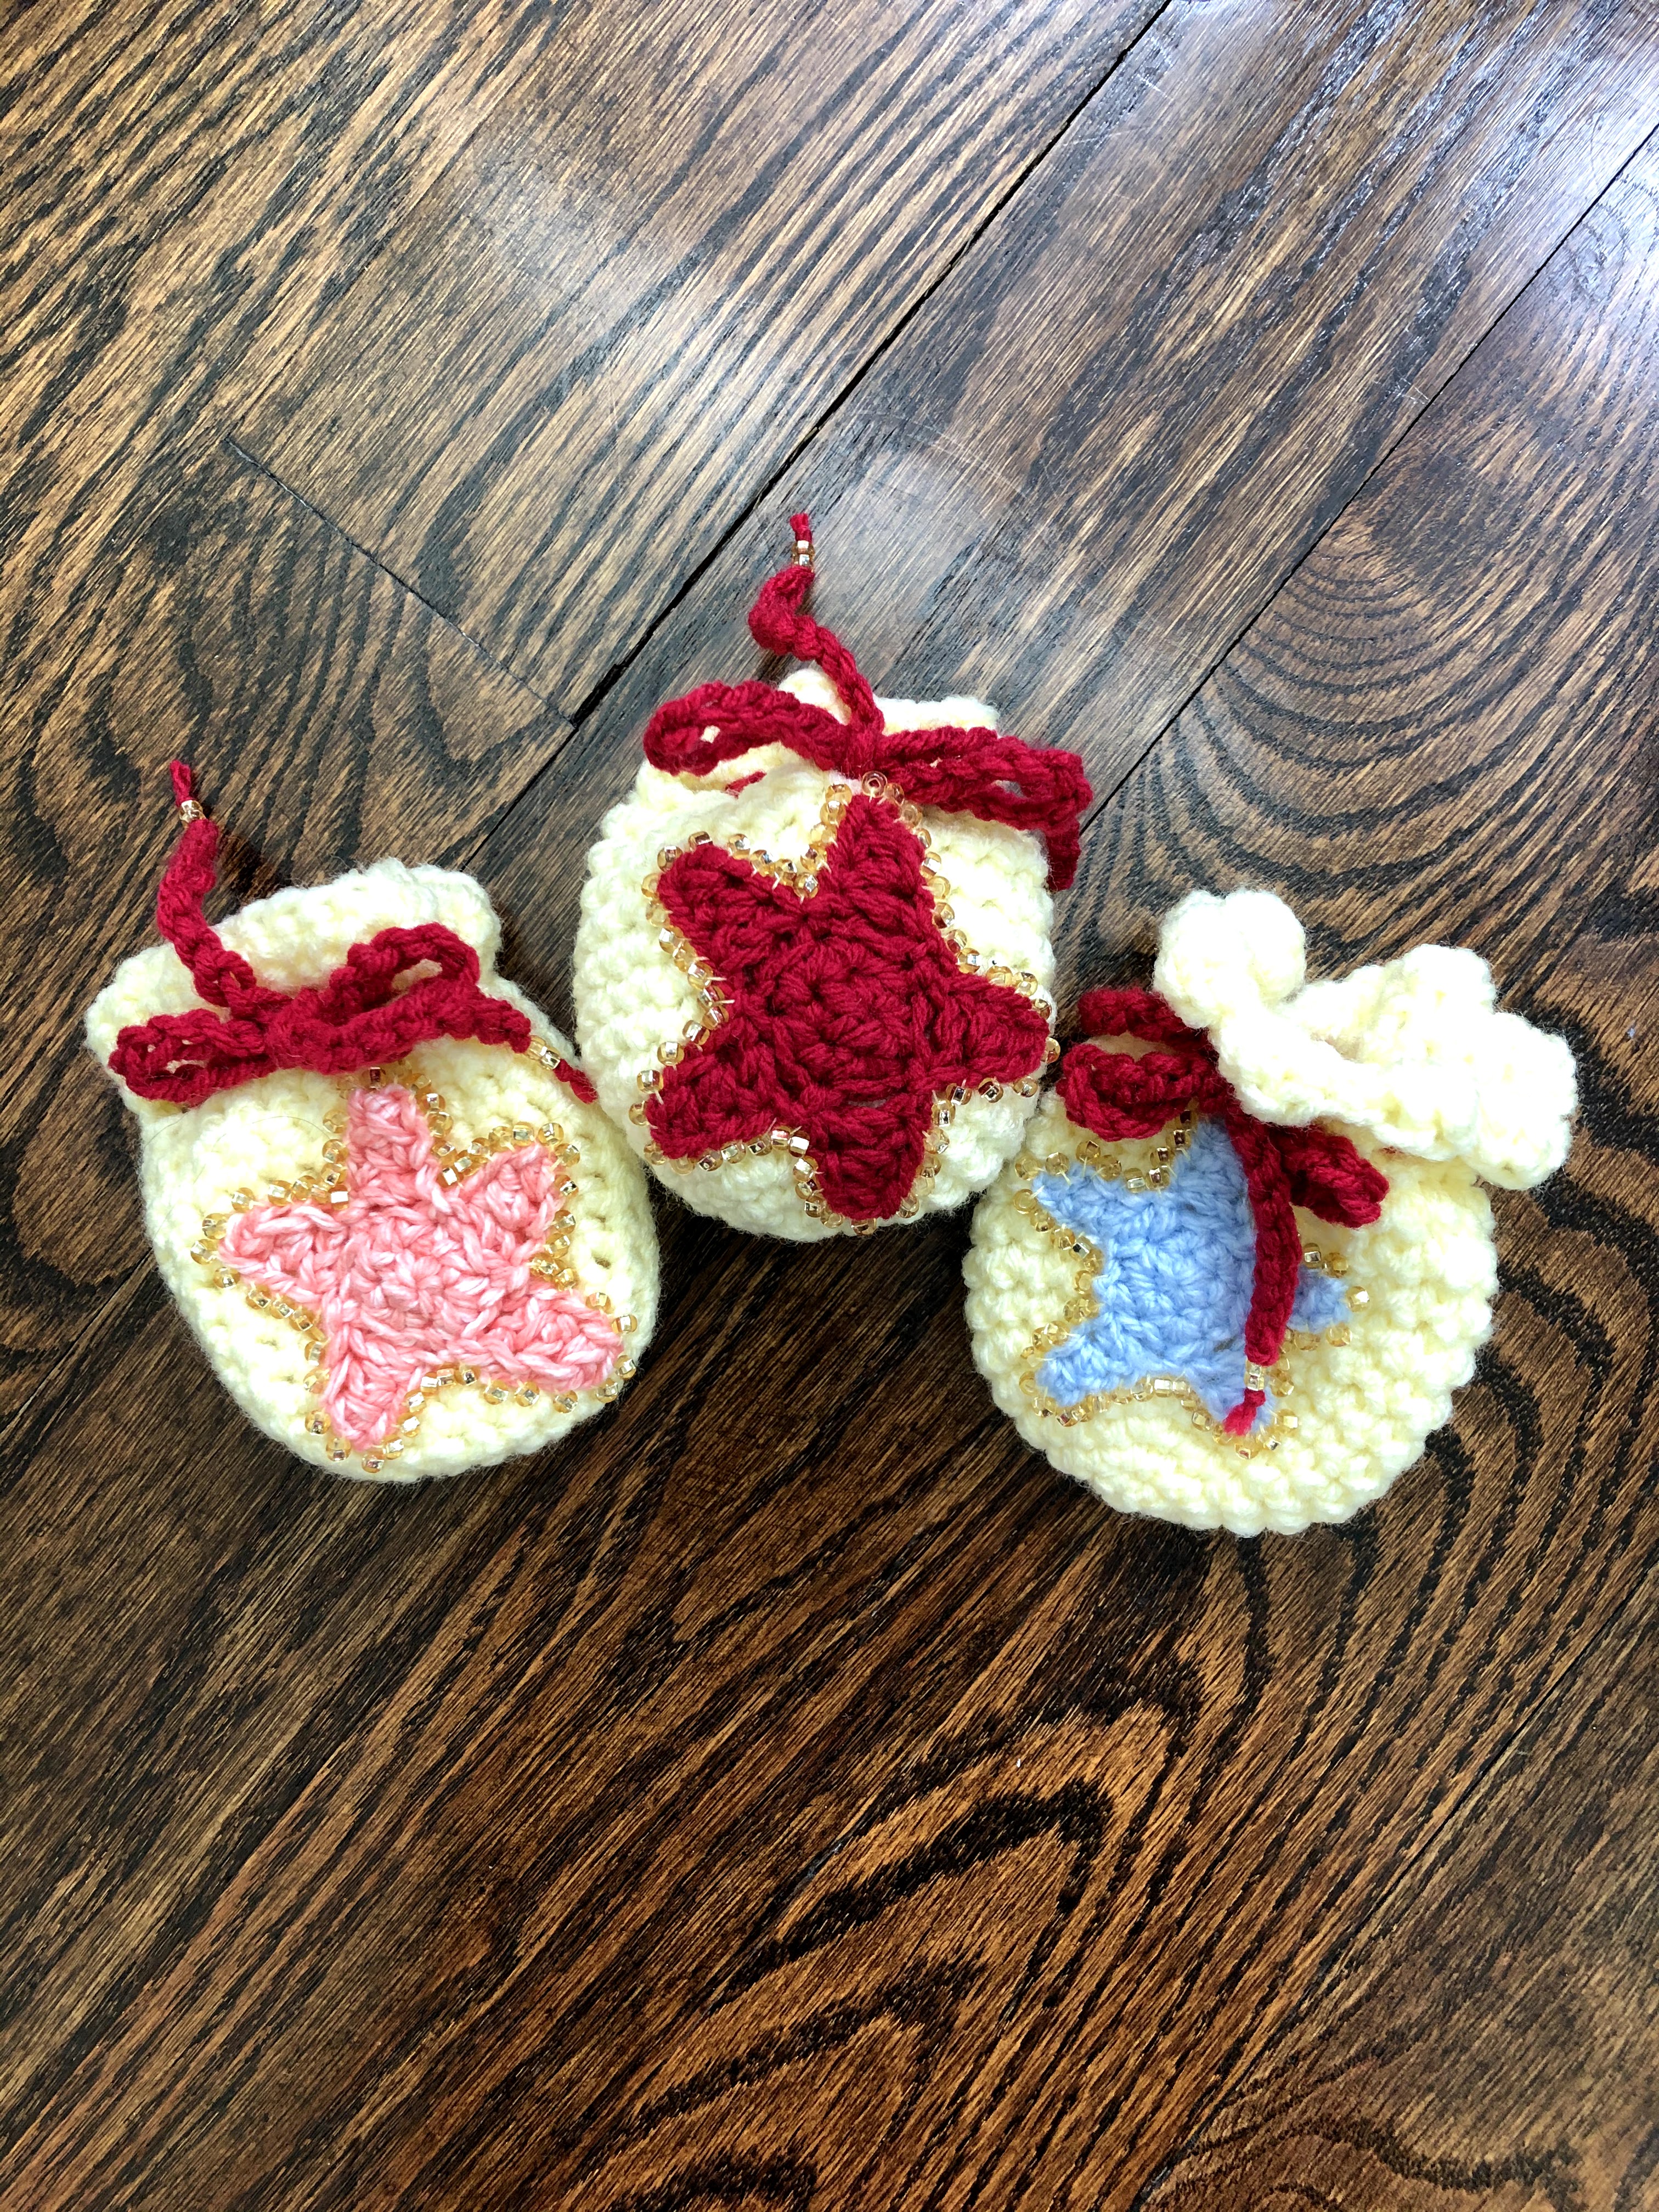 Inspired by a Reddit post and my friends' love for Animal Crossing, three Bell Bags customized with their favorite colors (orange, red, and blue stars on yellow pouches with red drawstrings).